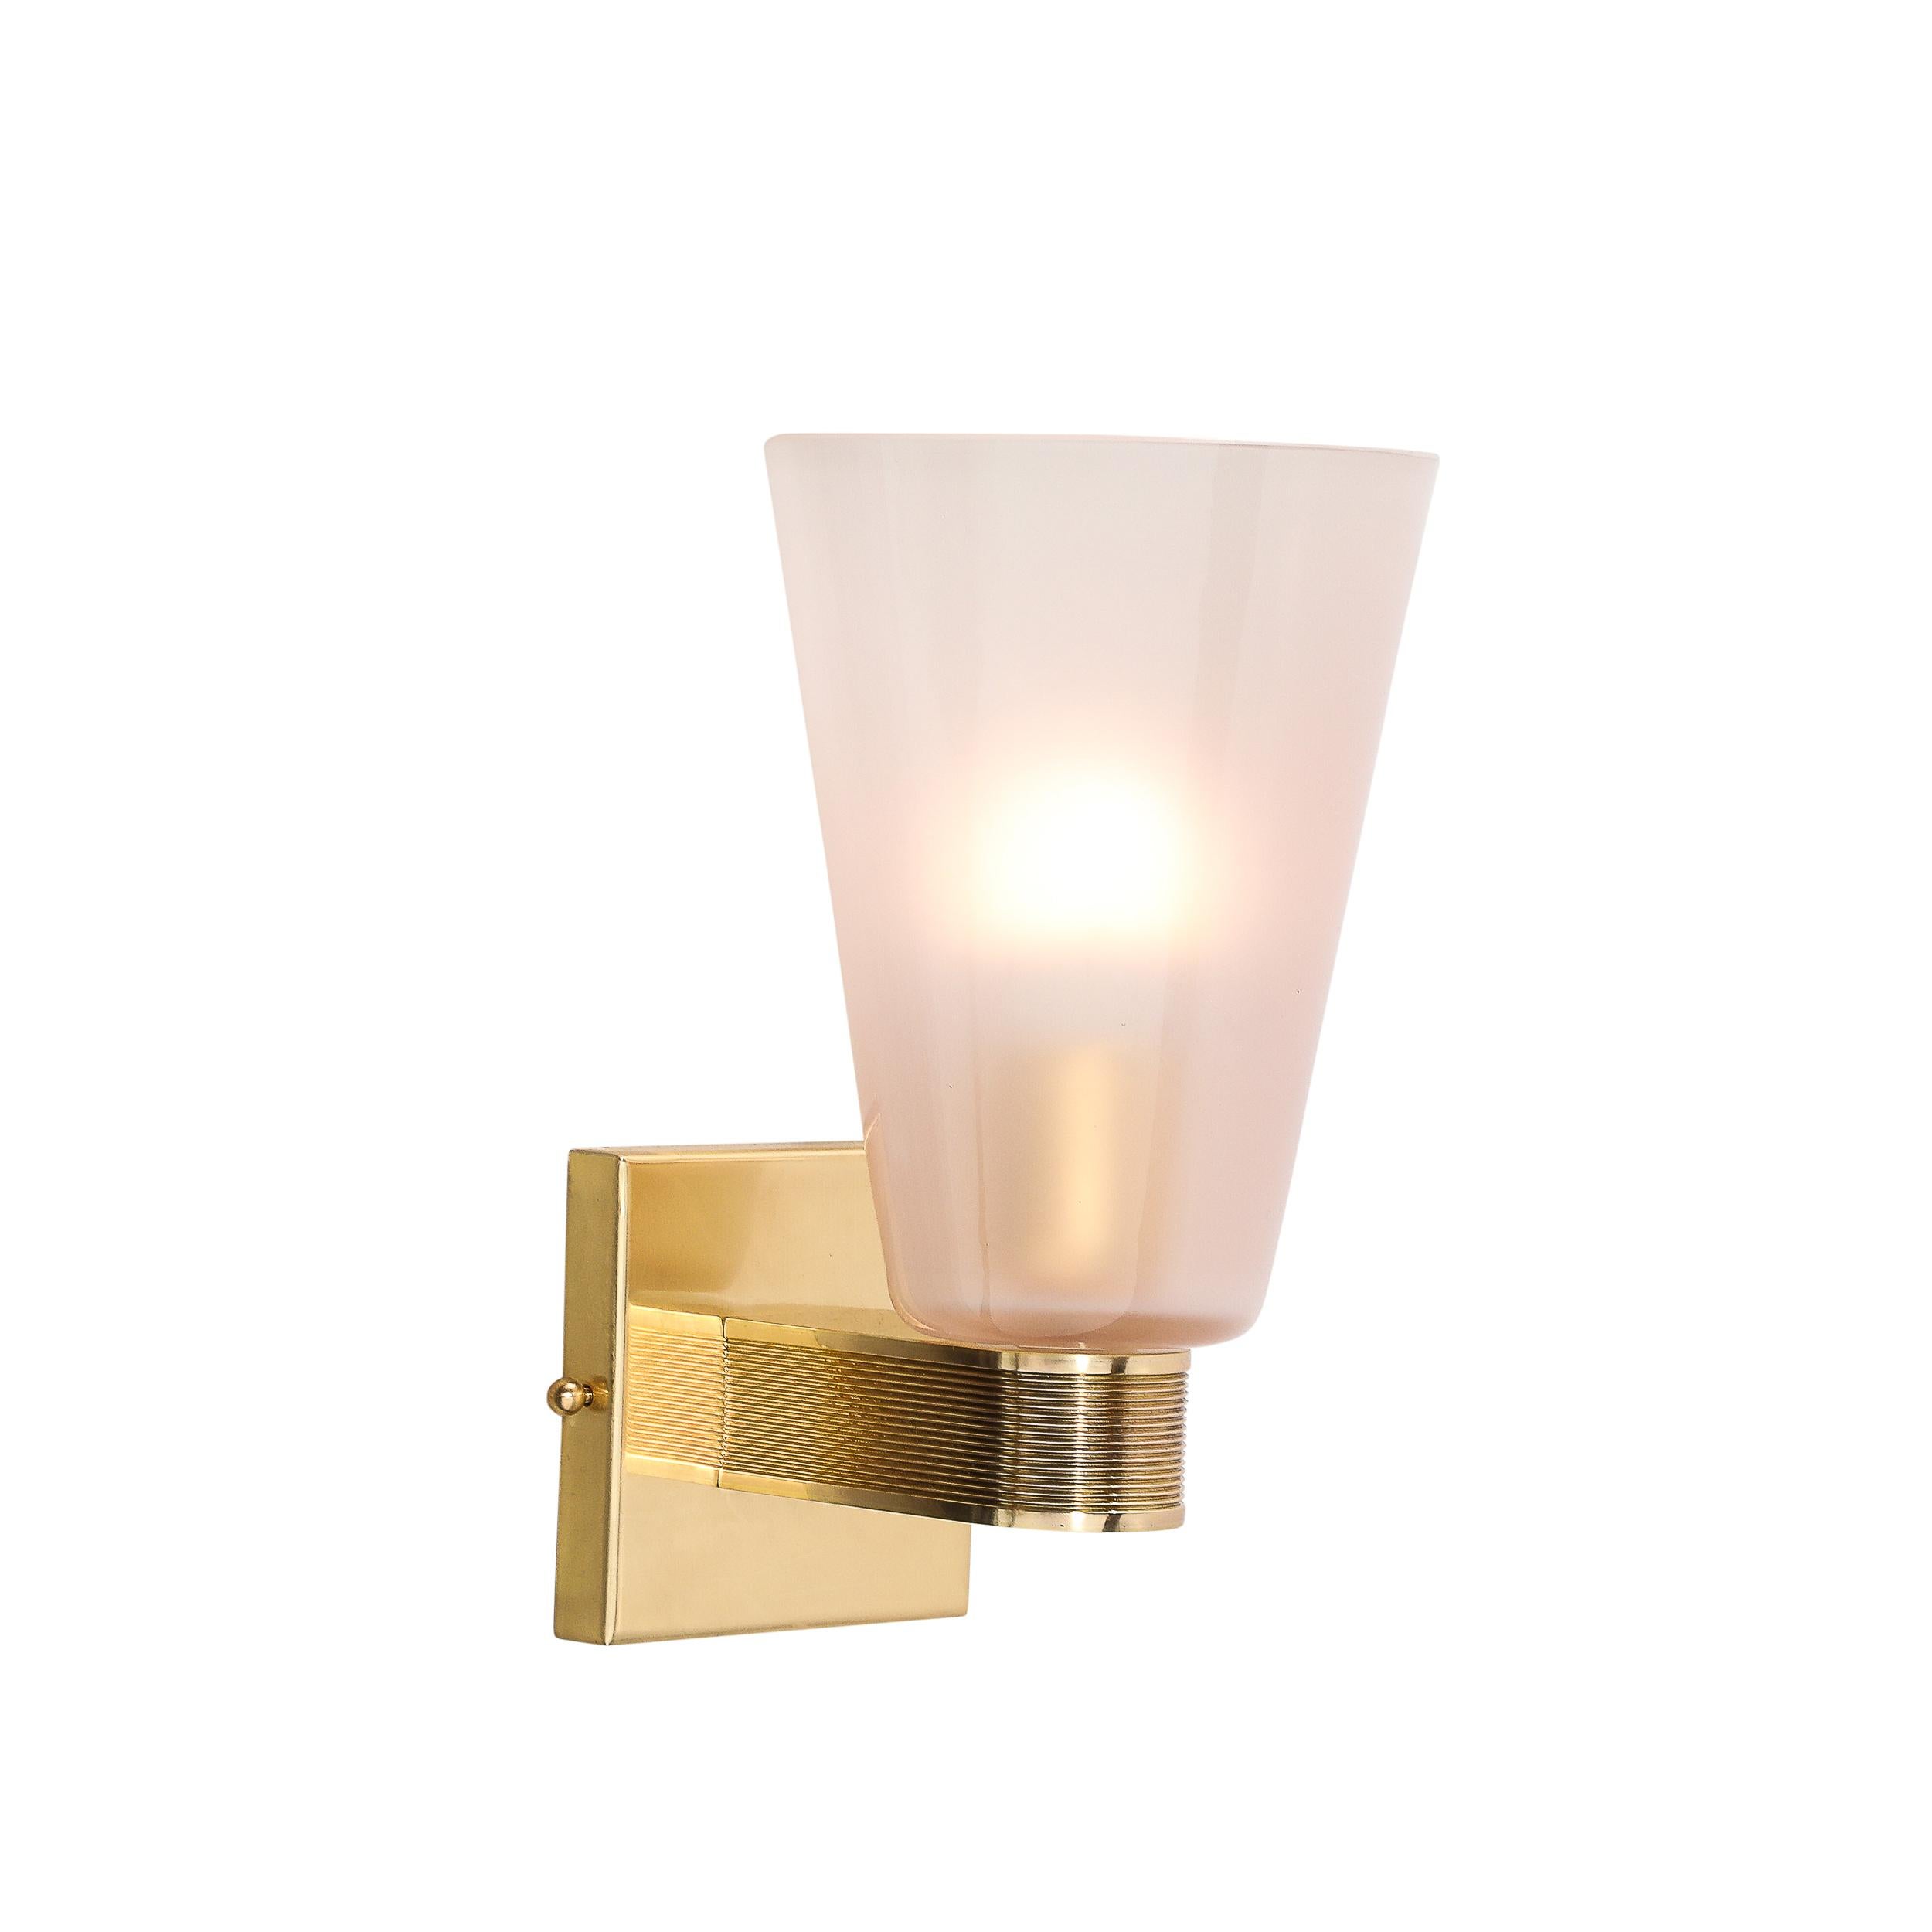 This elegantly minimal Pair of Modernist Hand-Blown Murano Glass Sconces in Smoked Pink Garnet Hue W/ Reeded Brass Fittings originates from Italy during the 21st Century. Featuring a conical profile in hand-blown murano glass sporting a subtle yet